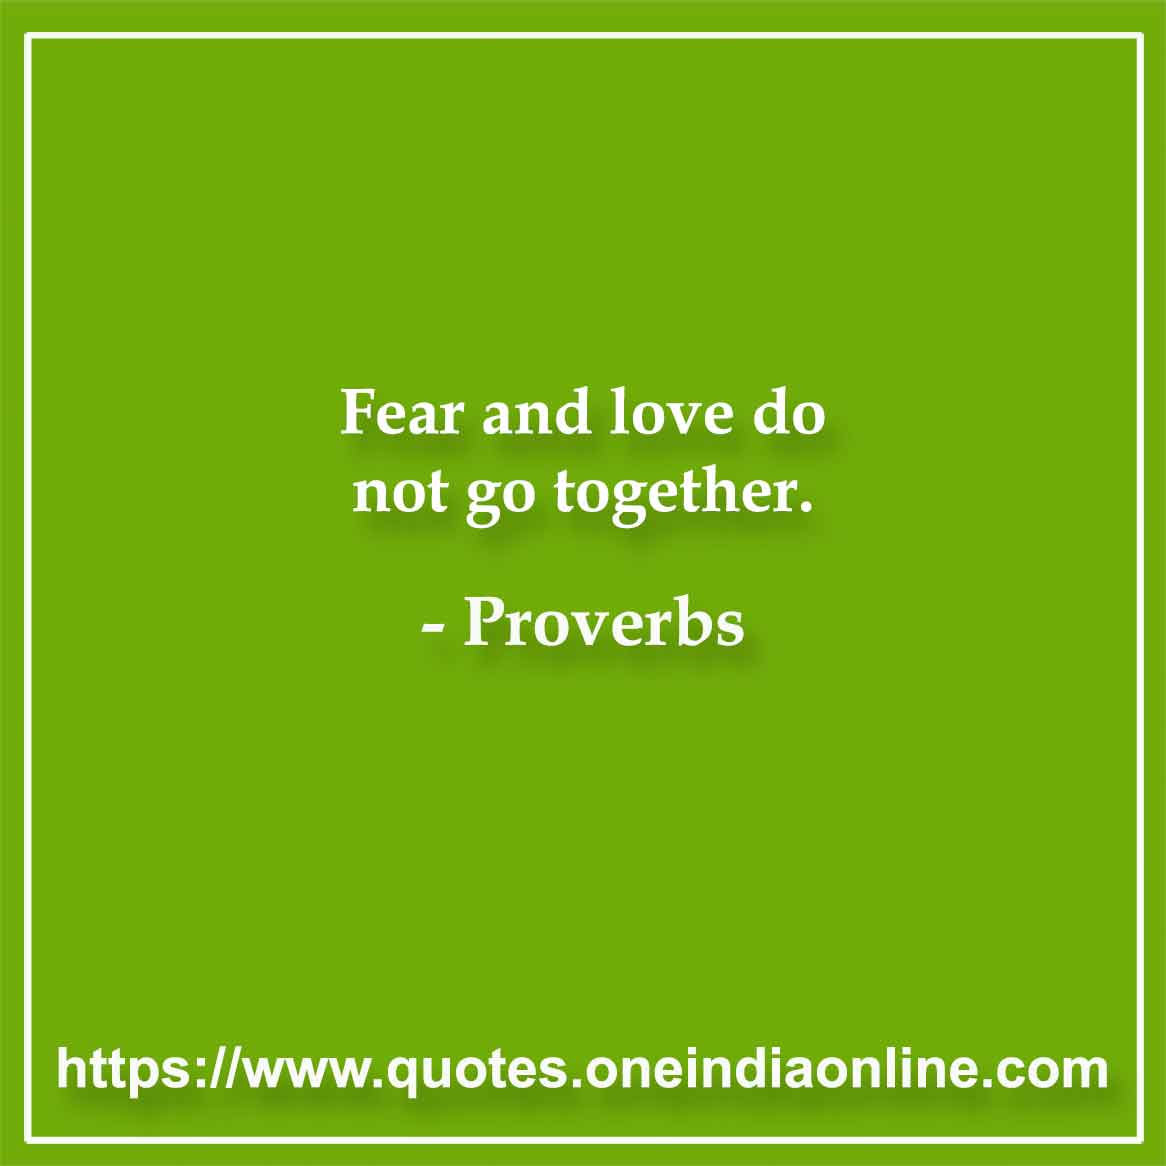 Fear and love do not go together.